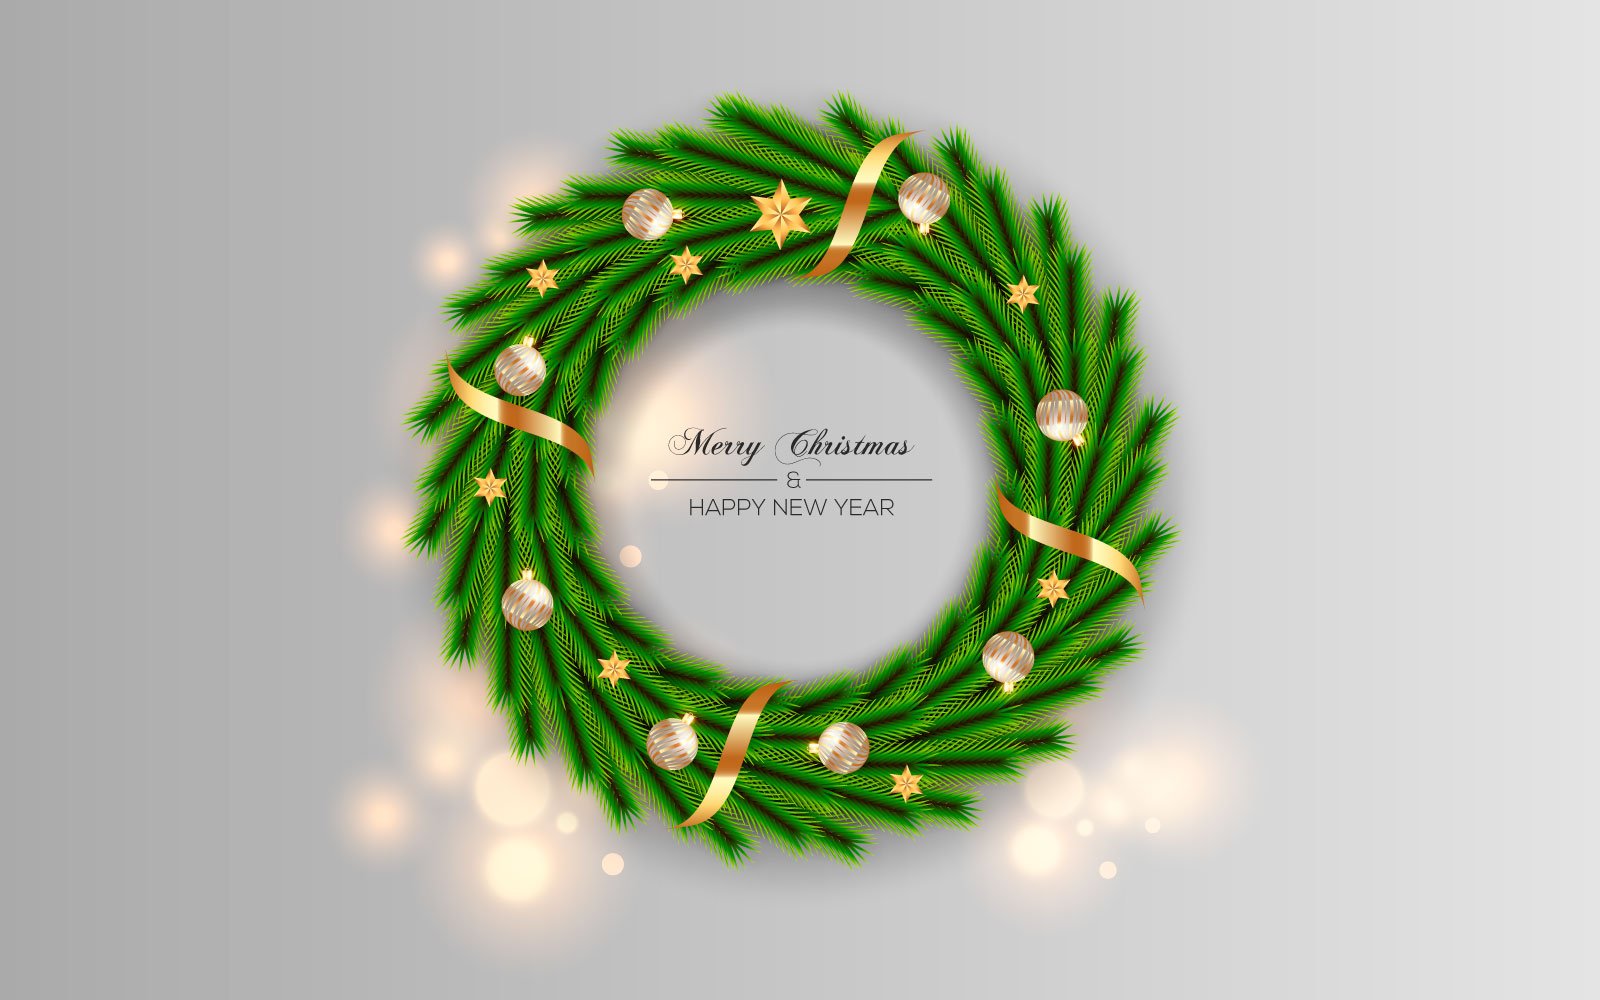 Christmas Wreath Decoration With Green Pine Branch